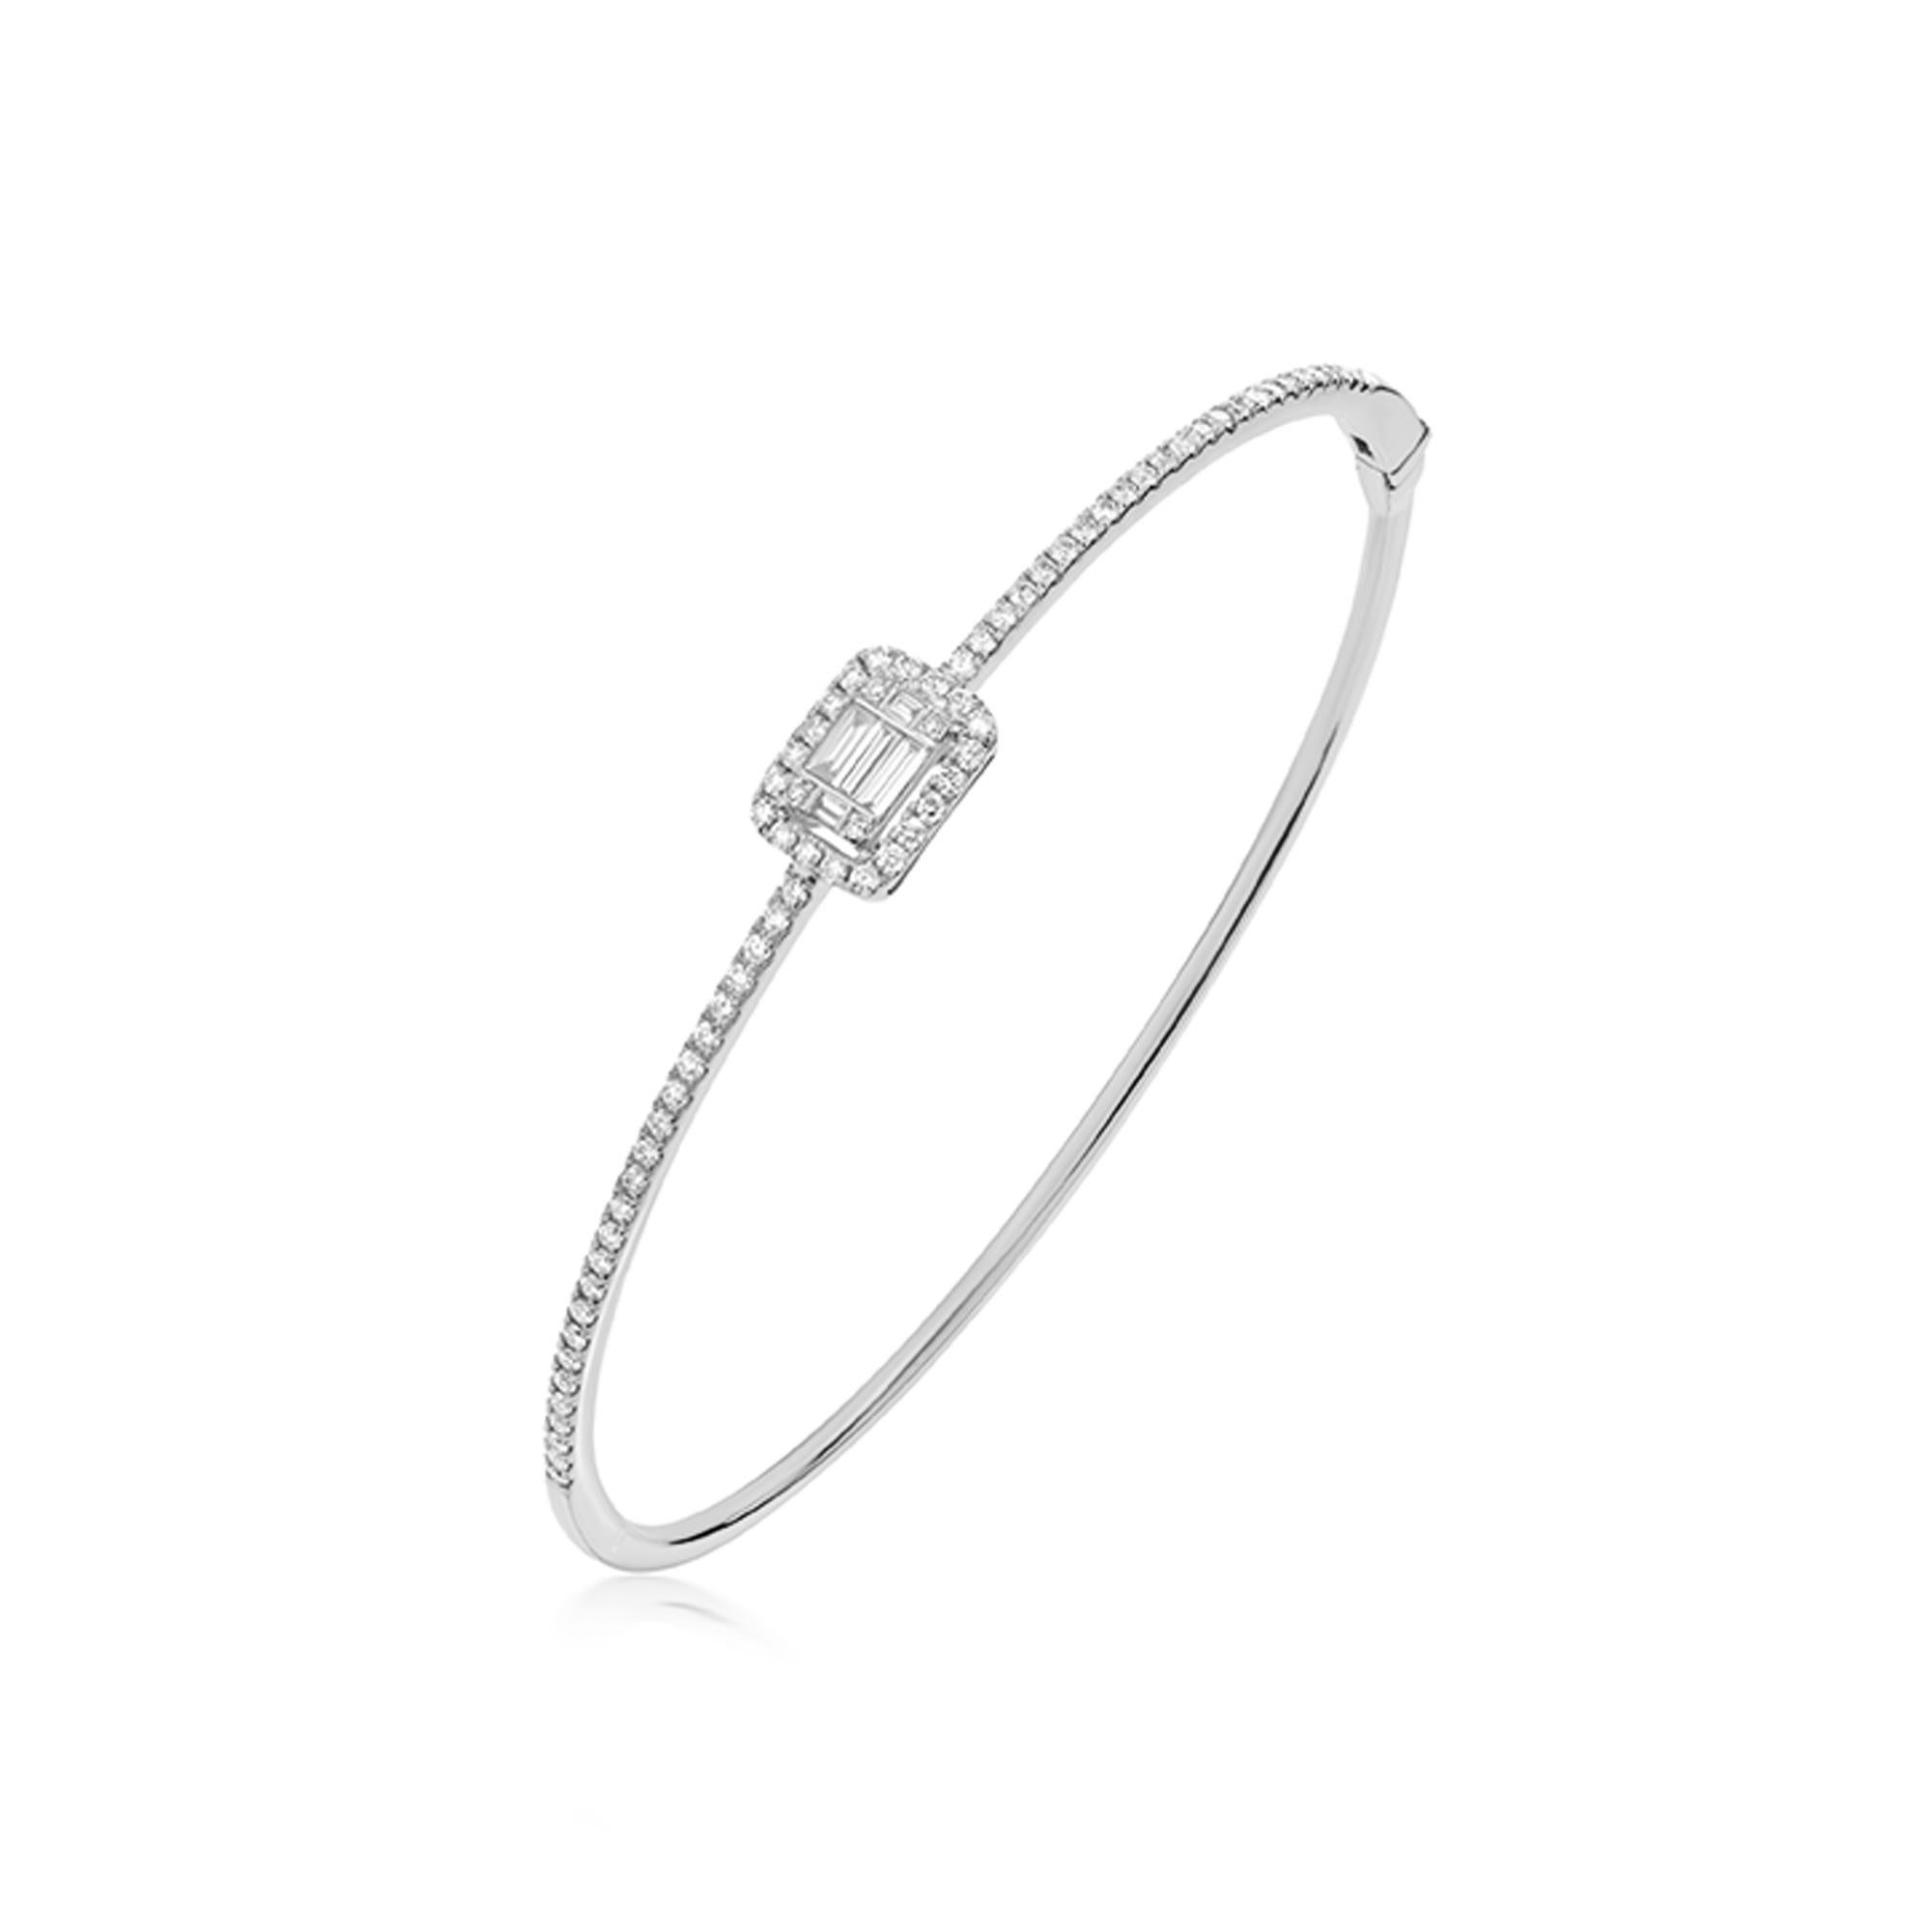 Baguette and round full-cut White Diamonds enhance the glam quotient of this sleek bangle, set in micro pave and illusion setting. The diamonds are SI1 in clarity, and GH in color, weighing 0.66 Cts. Dazzle and dab in this Luxle 18K White Gold shiny